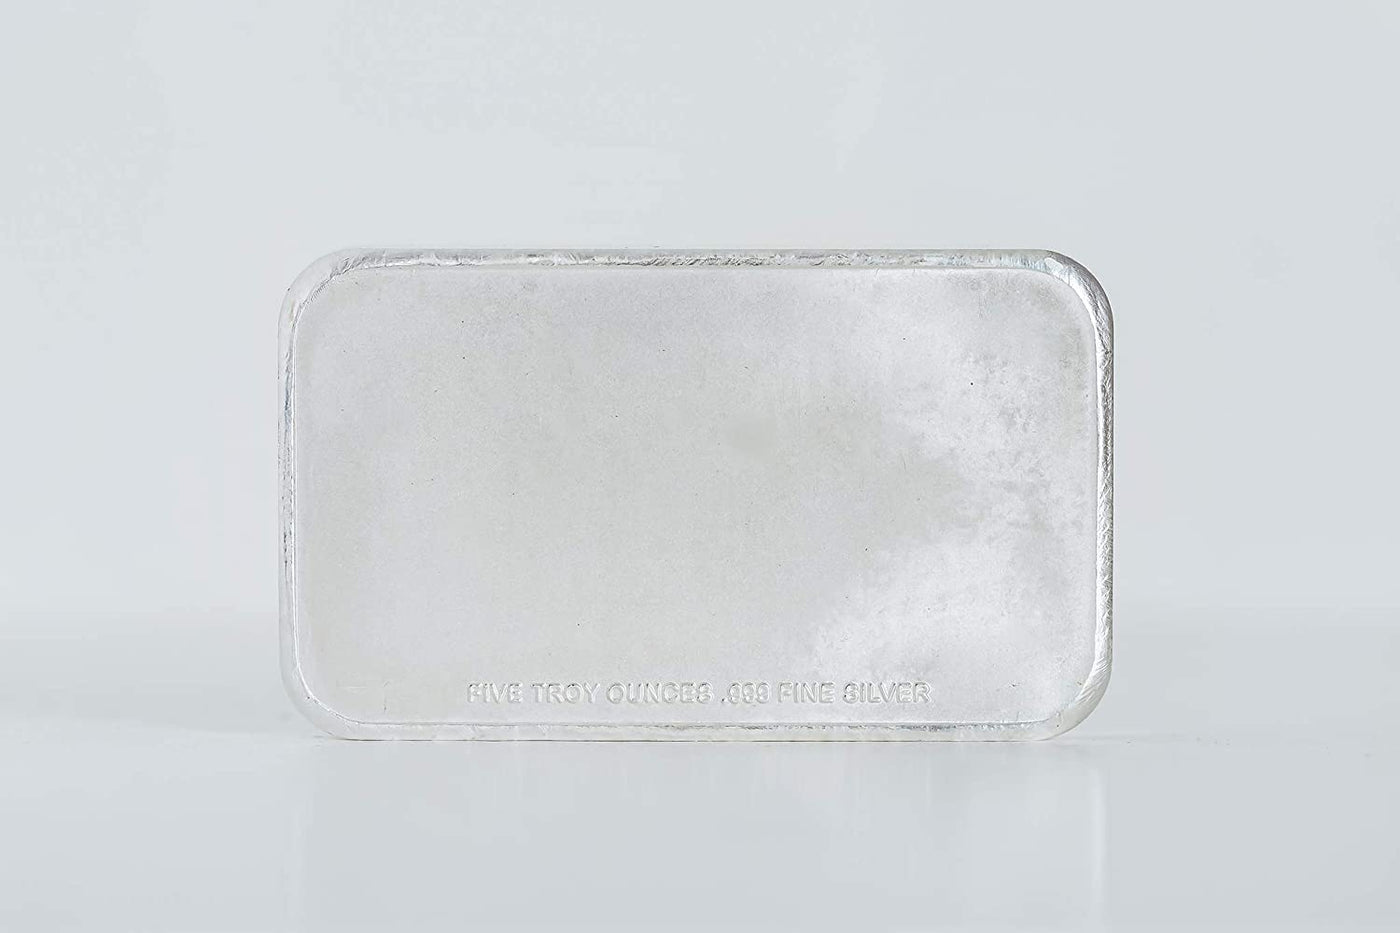 Metal Wallet .999 Pure Silver 5OZ BAR Edition 12-24 Word Recovery Passphrase Crypto Seed Storage